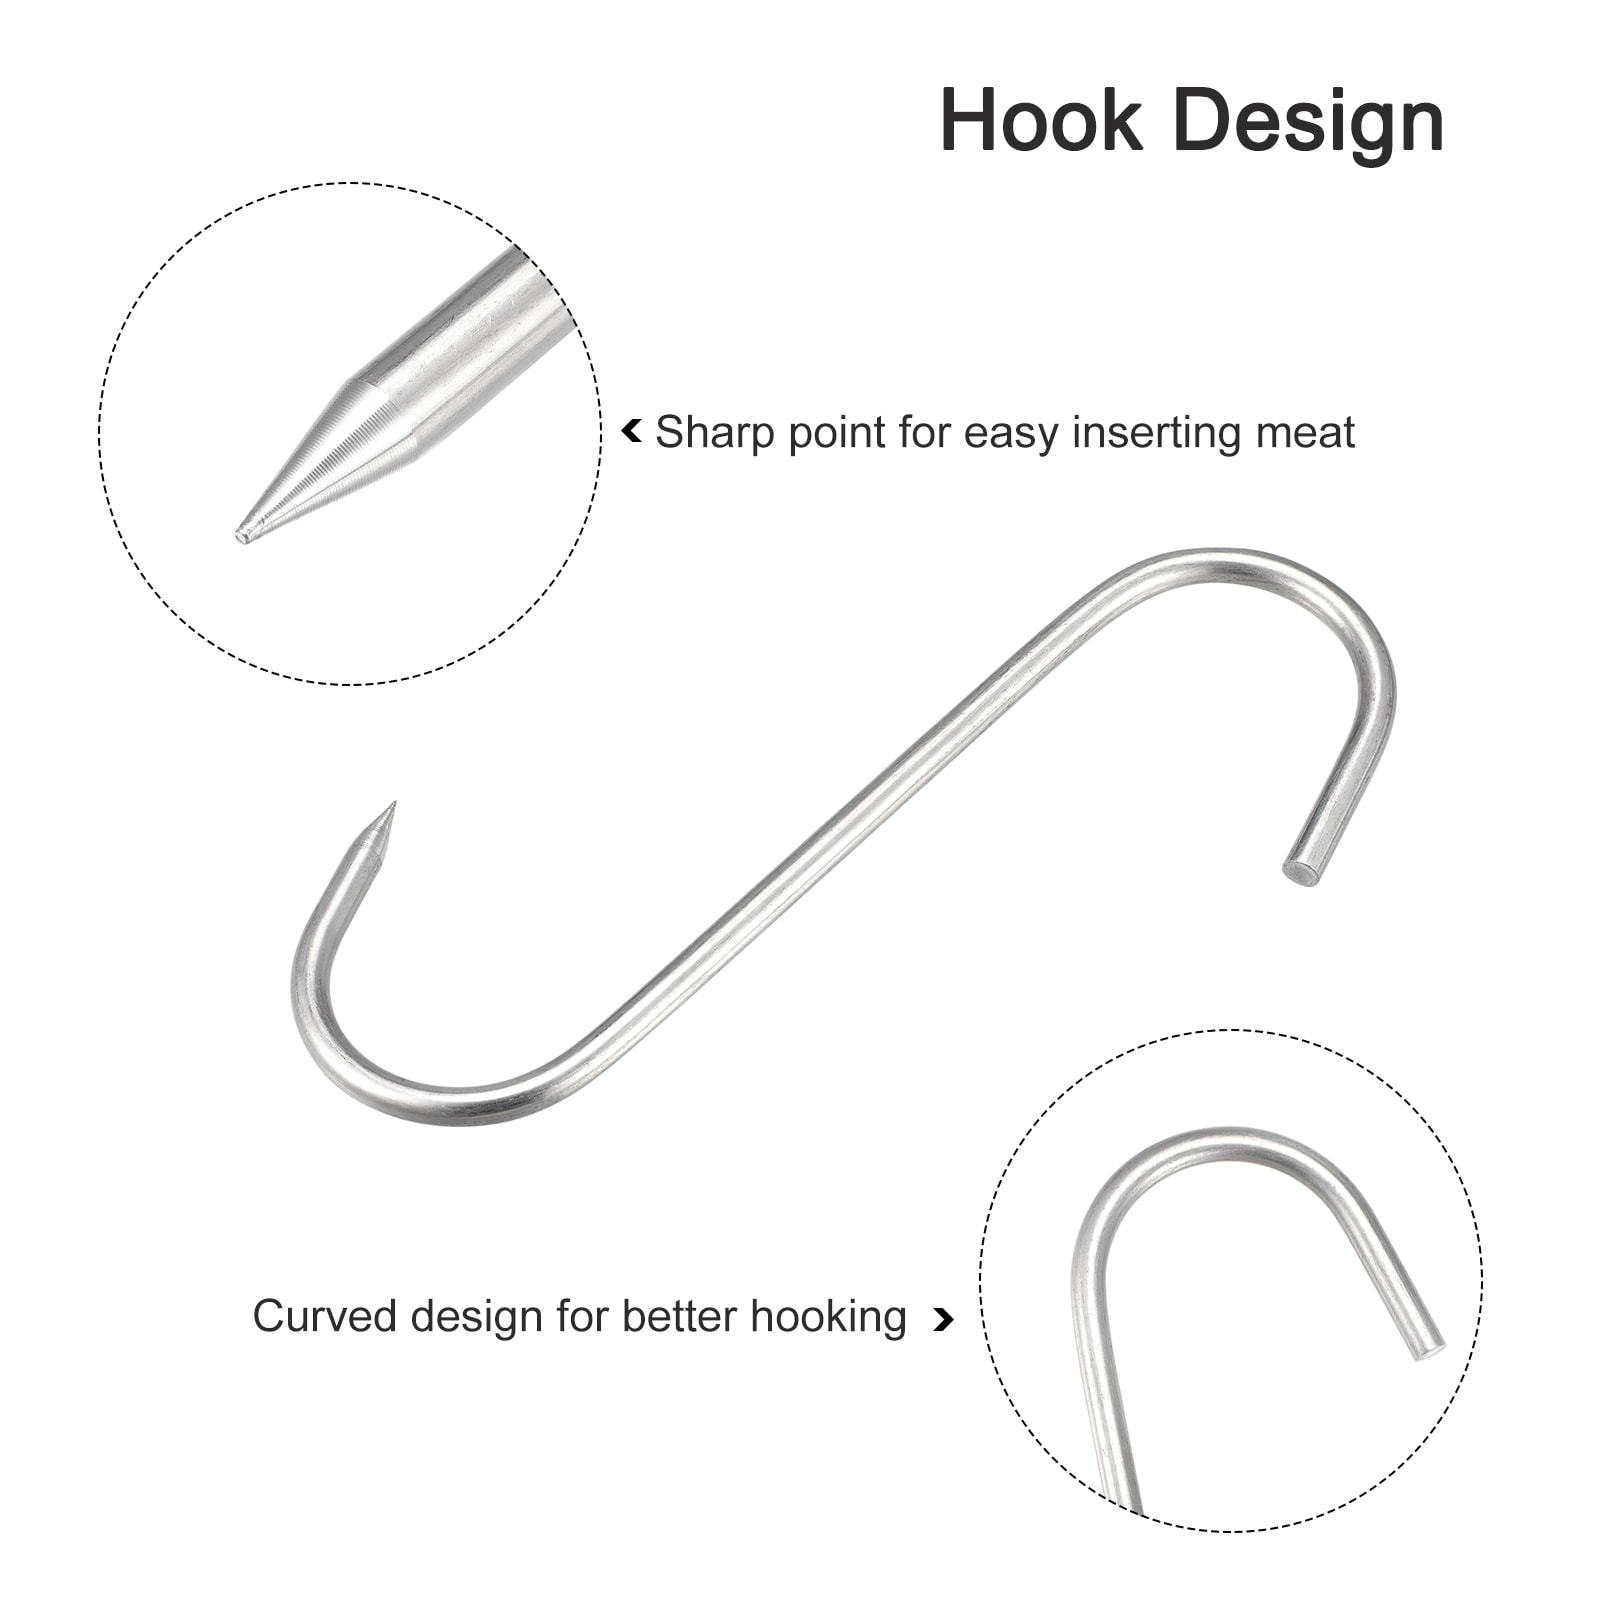 https://ak1.ostkcdn.com/images/products/is/images/direct/6cf15cc9f5c7aab20780f644a28acfdfcb7cb121/5.91%22-Meat-Hooks%2C-0.24%22-Thick-Stainless-Steel-S-Hook-Meat-Processing-1Pcs.jpg